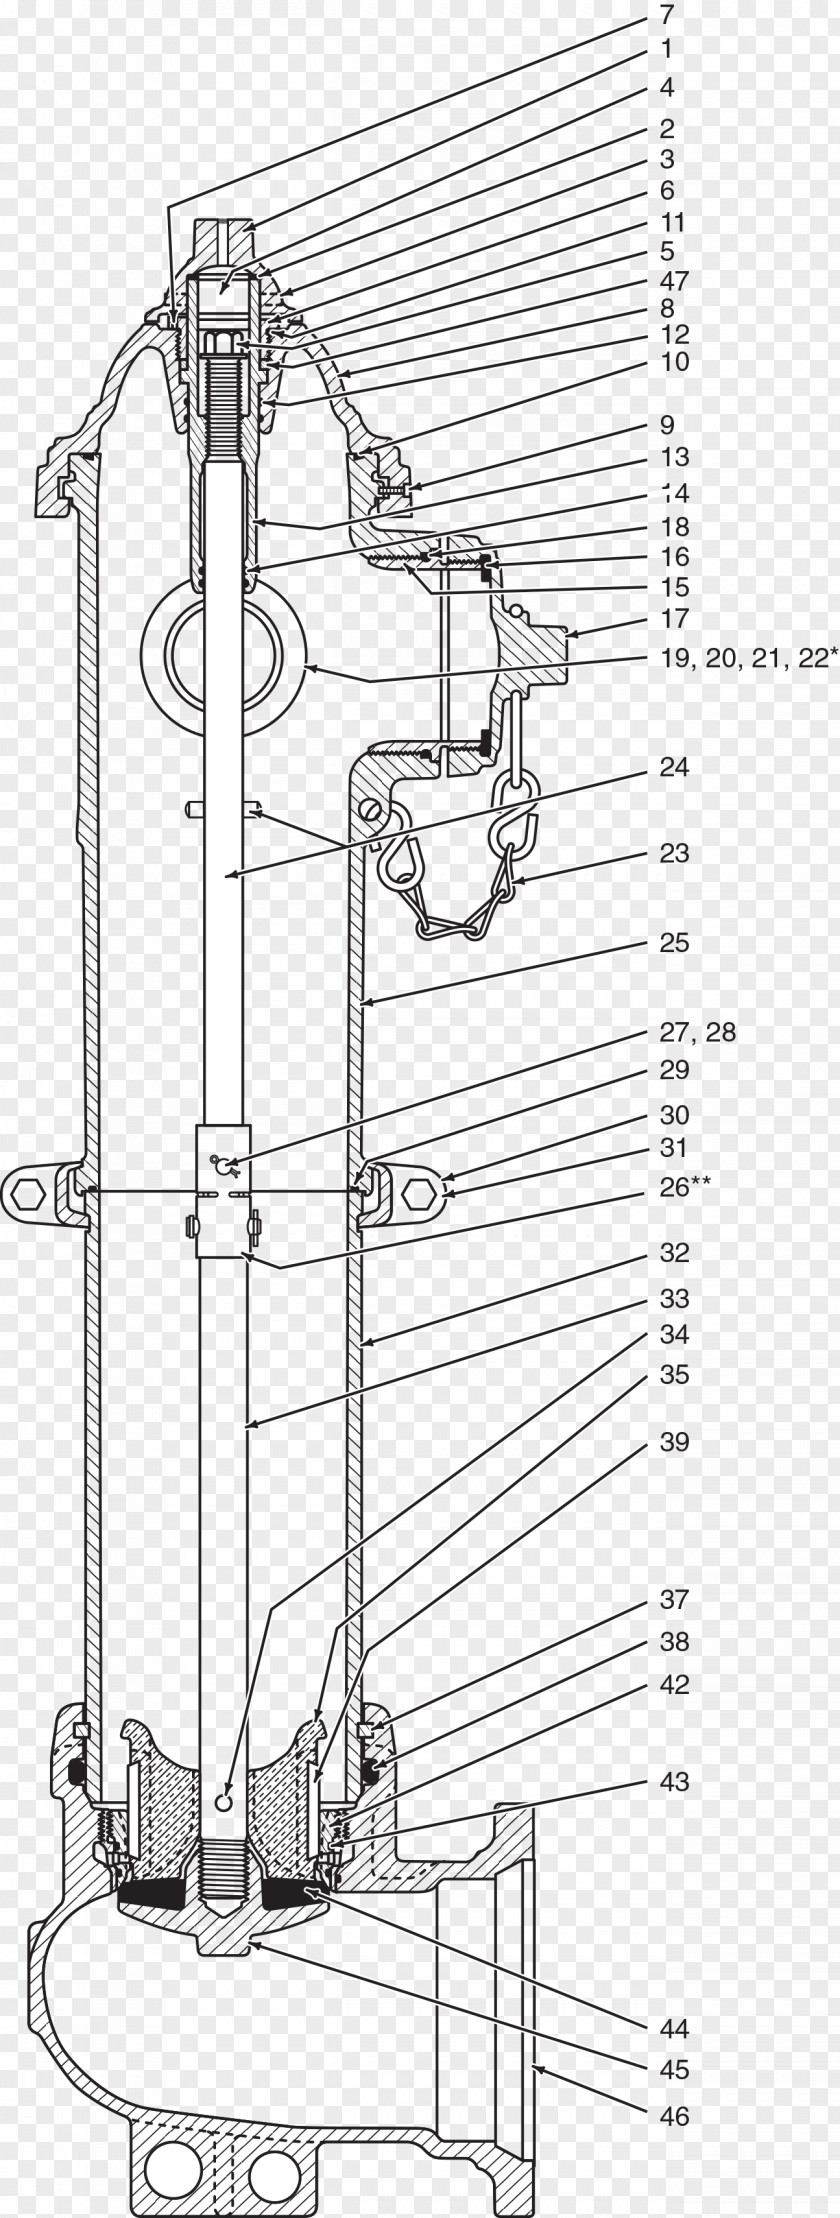 Fire Hydrant Wiring Diagram Technical Drawing PNG